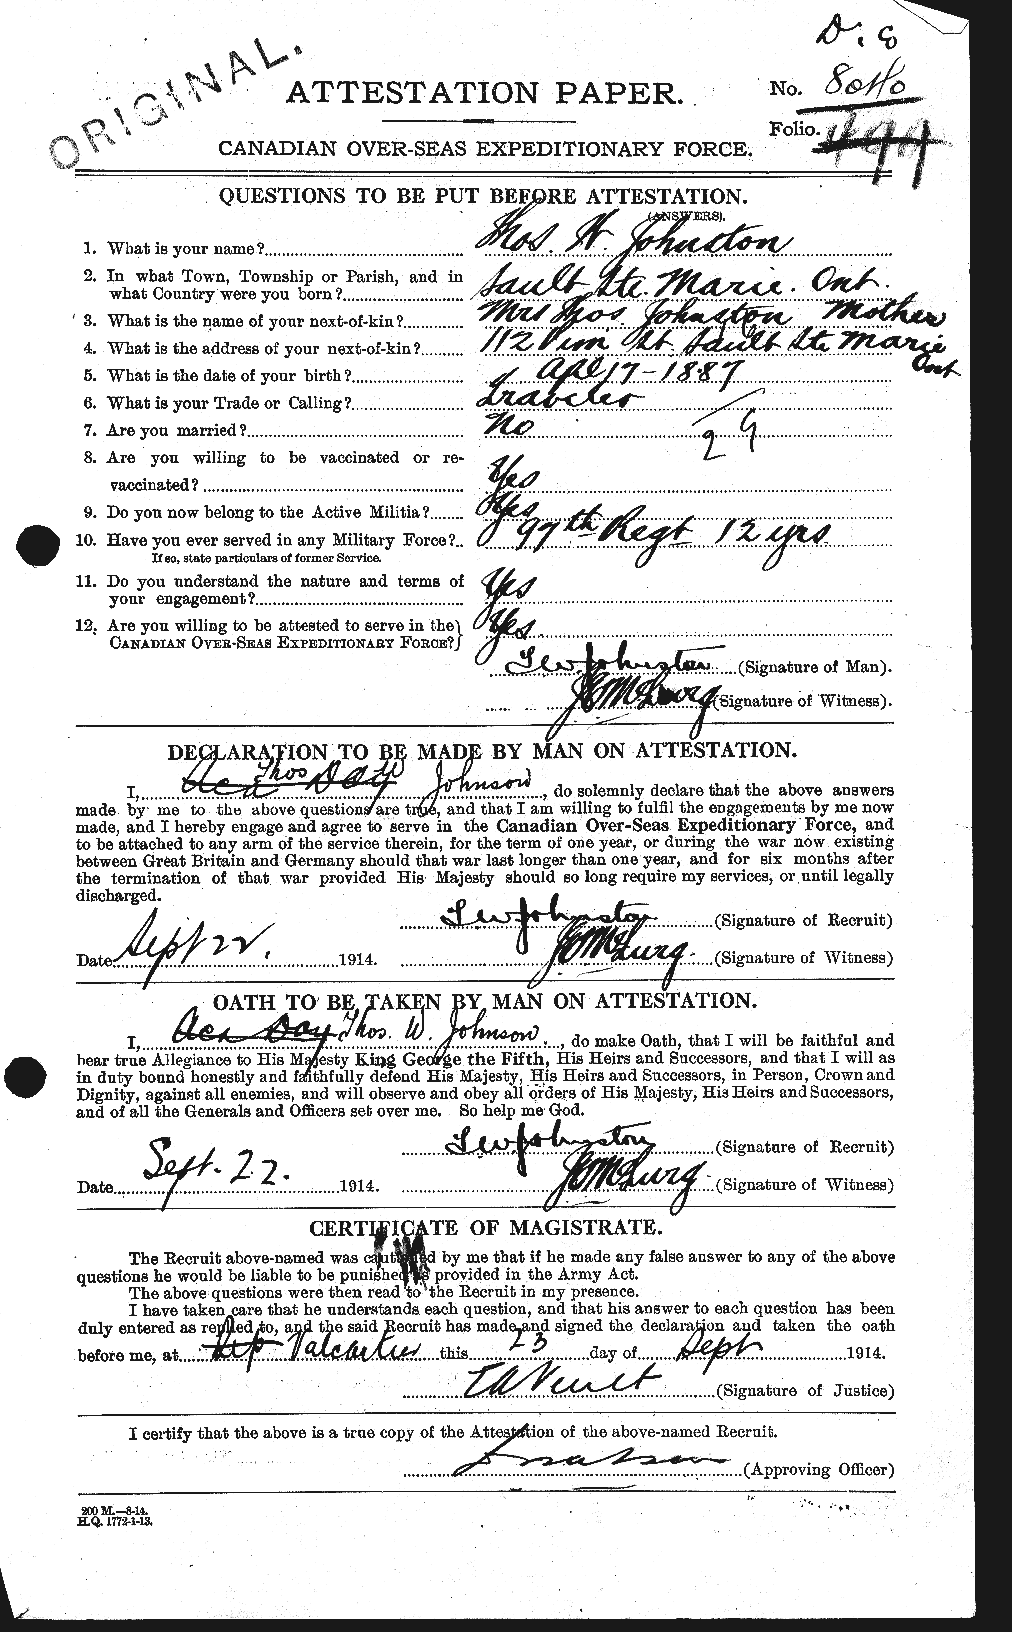 Personnel Records of the First World War - CEF 427177a